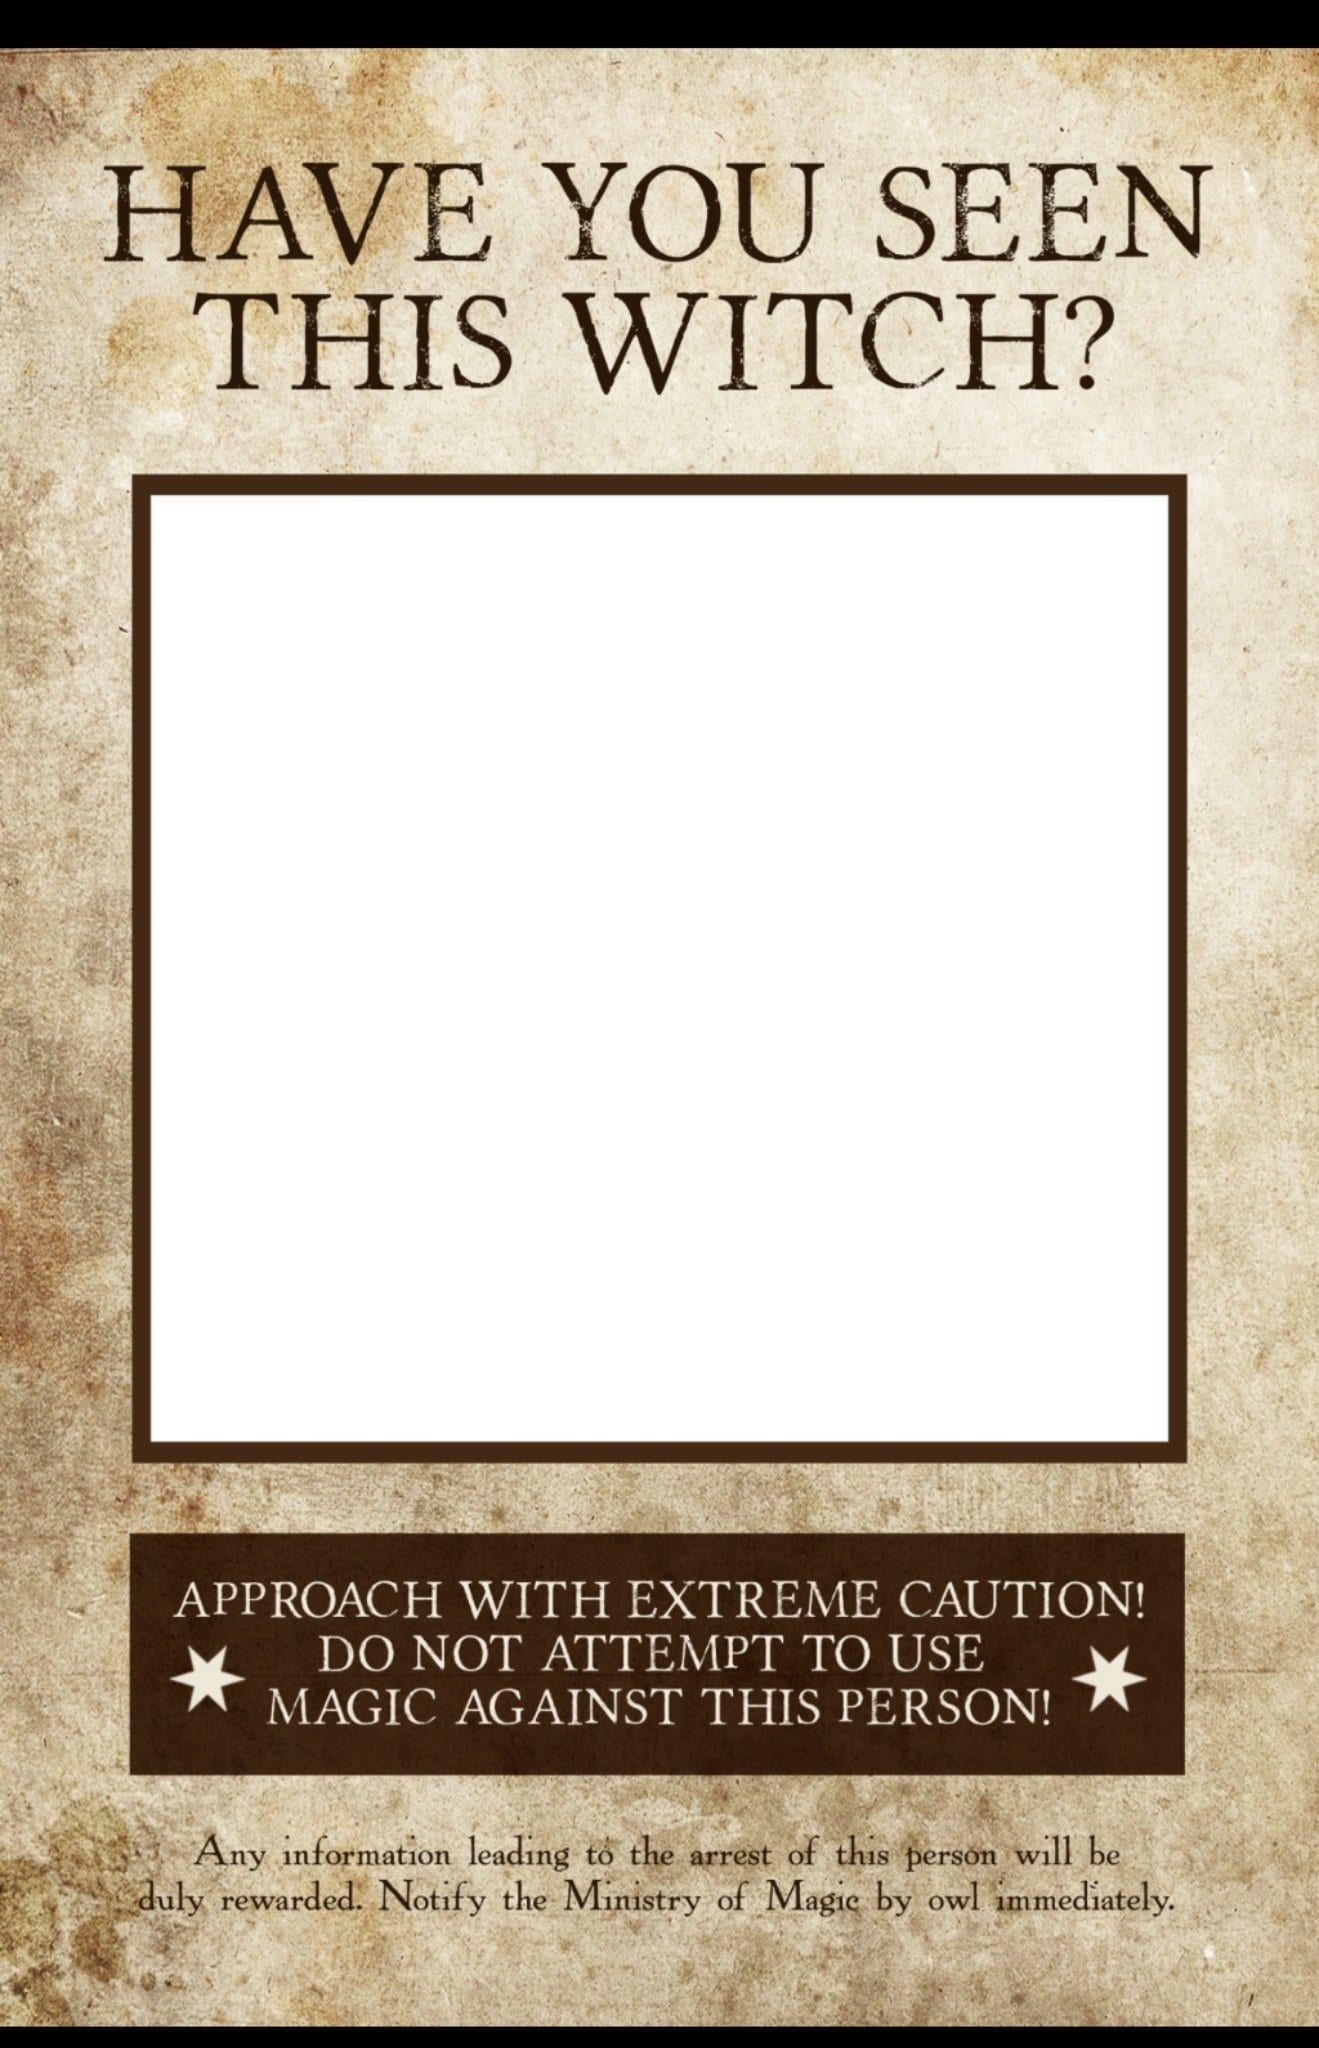 Have You Seen This Witch Photo Booth Prop Wanted Poster Printable Wanted Witch Poster Wedding Photo Booth Prop Instant Download Etsy